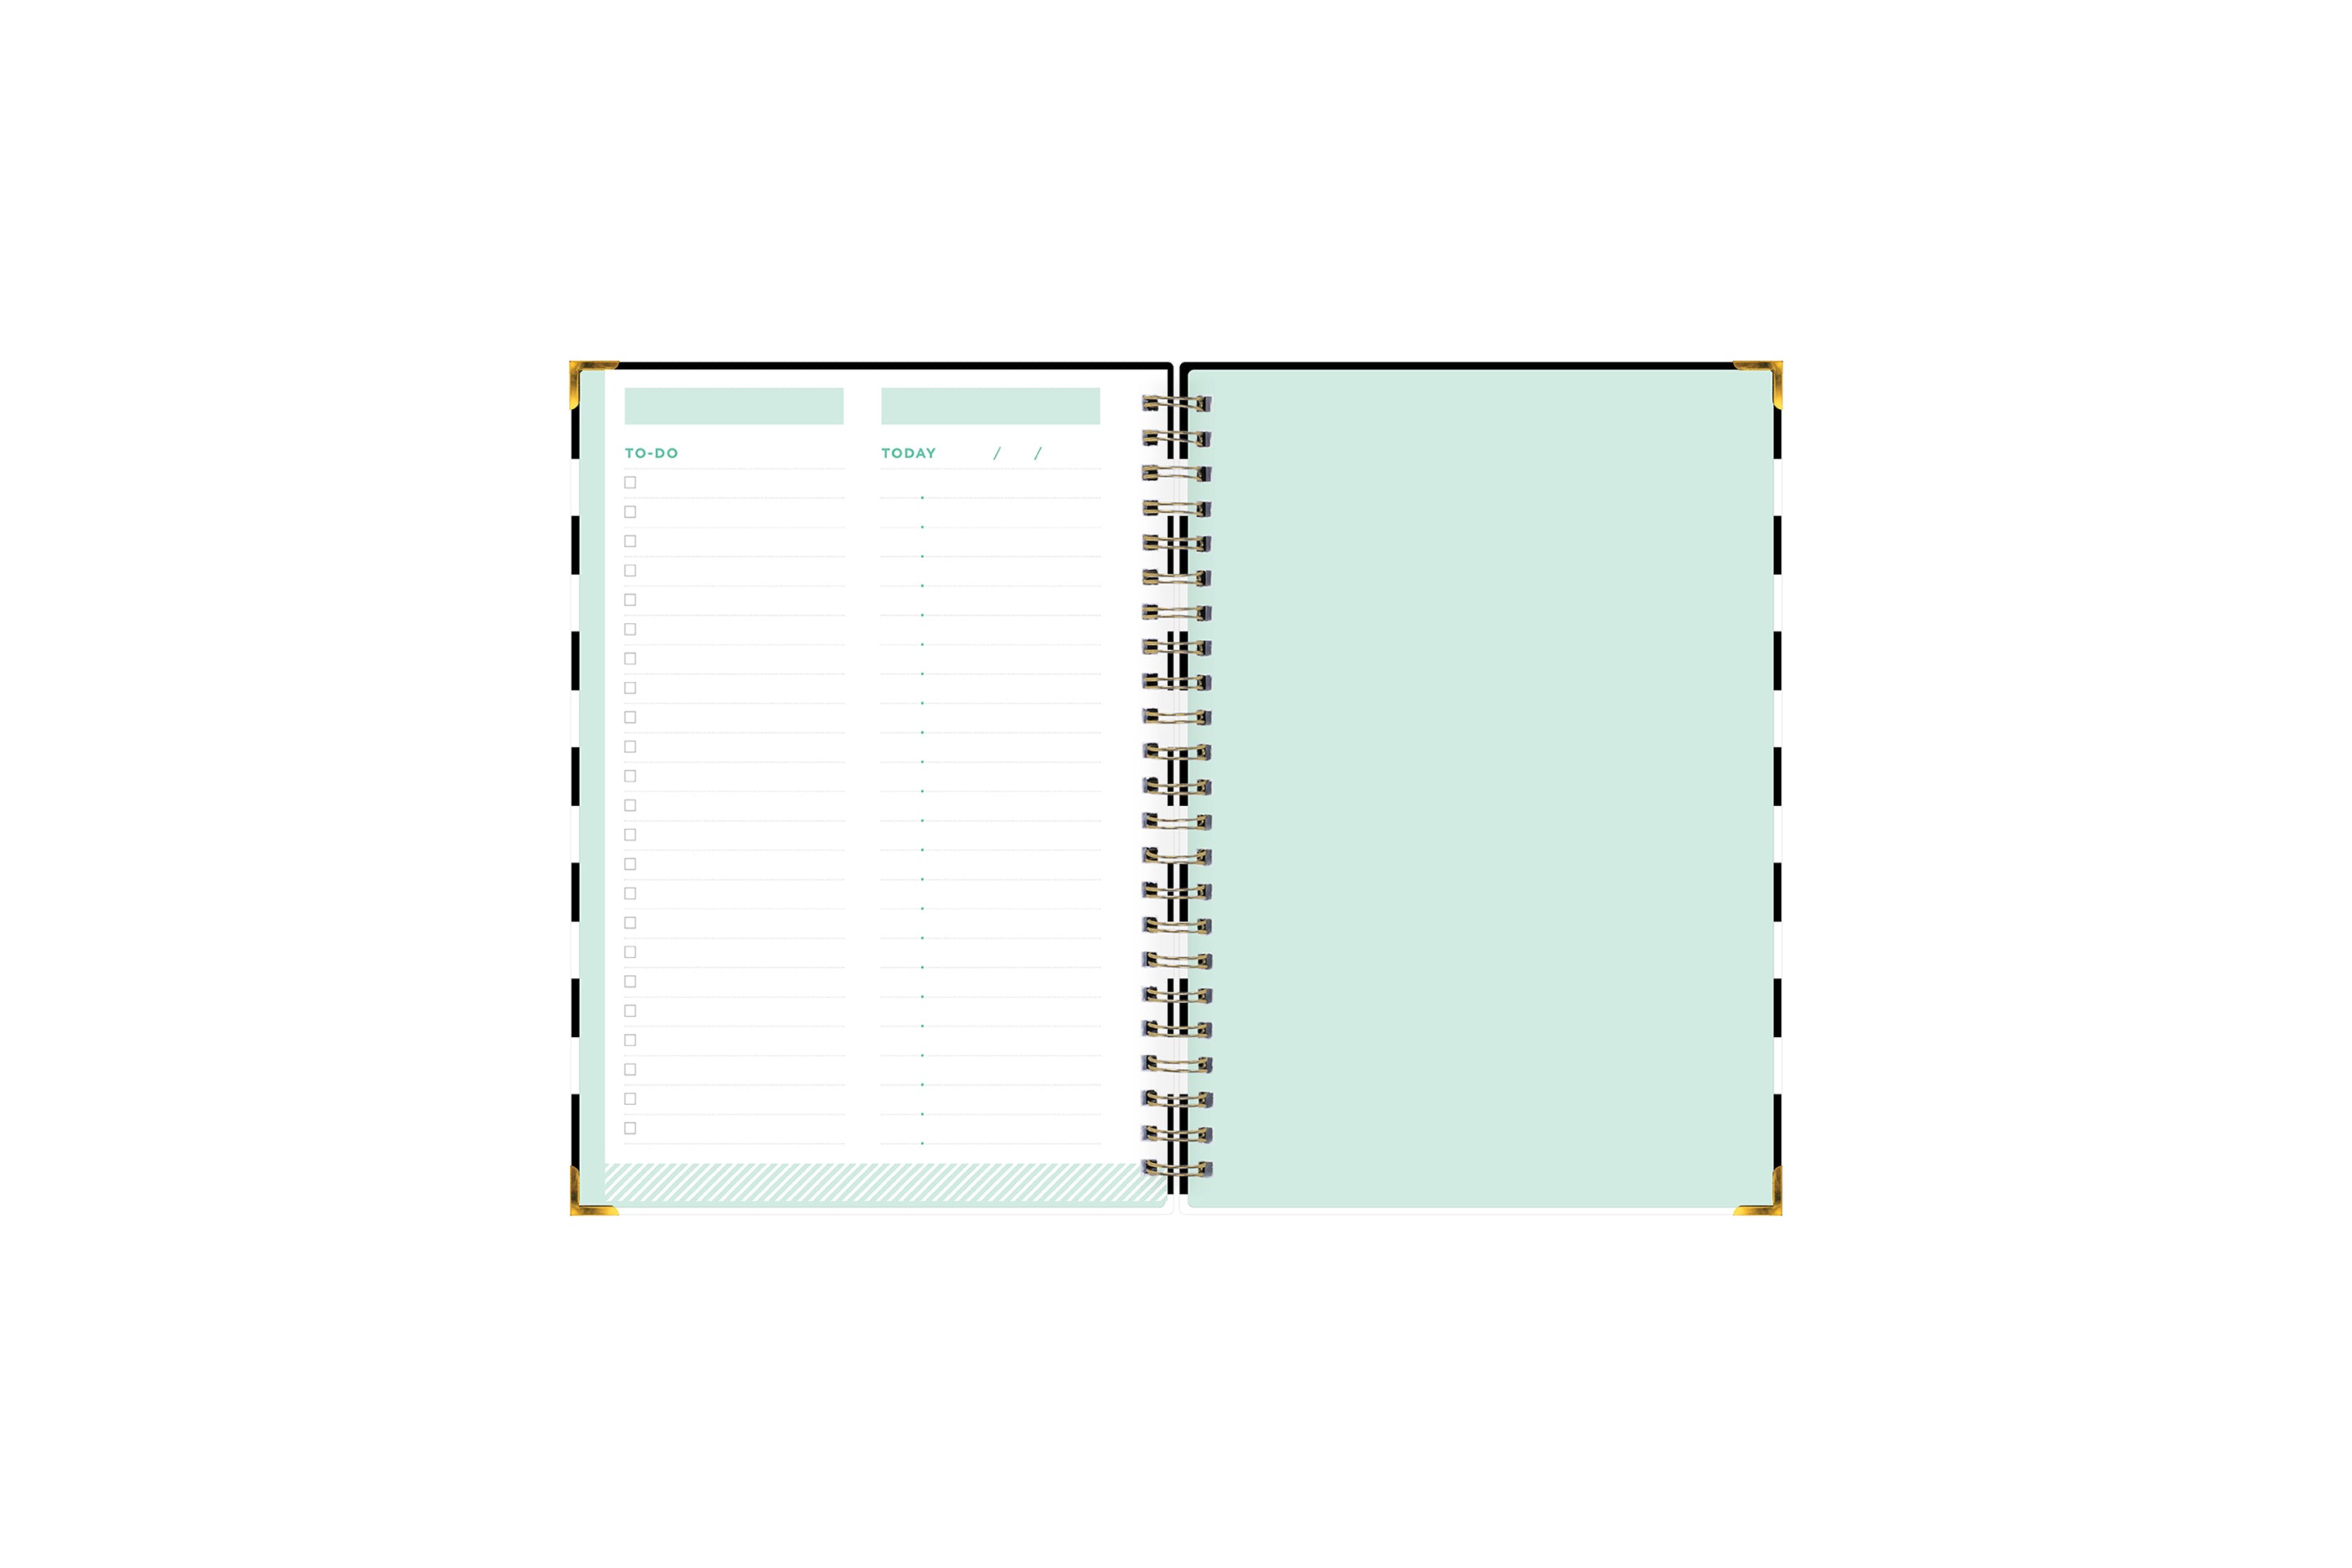 This Day designer for blue sky today and to-do notebook features an interior layout with To Do list, check boxes, ample writing spice, bullet points, and section for putting subject and dates.